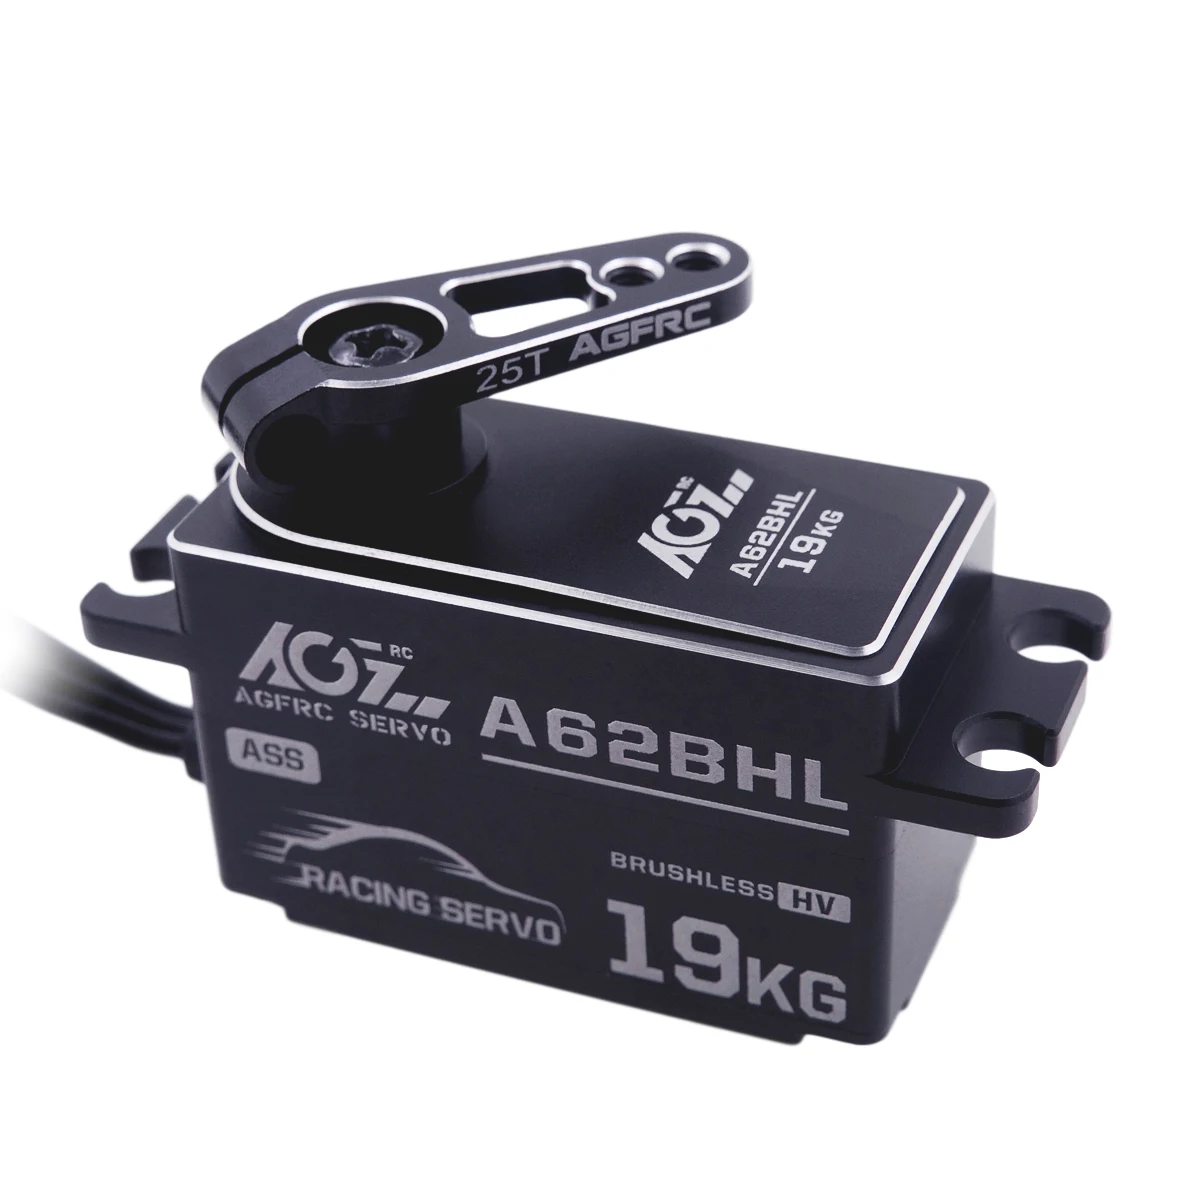 20KG 0.070sec High Speed Low Profile Programmable Brushless Servo(A62BHL)